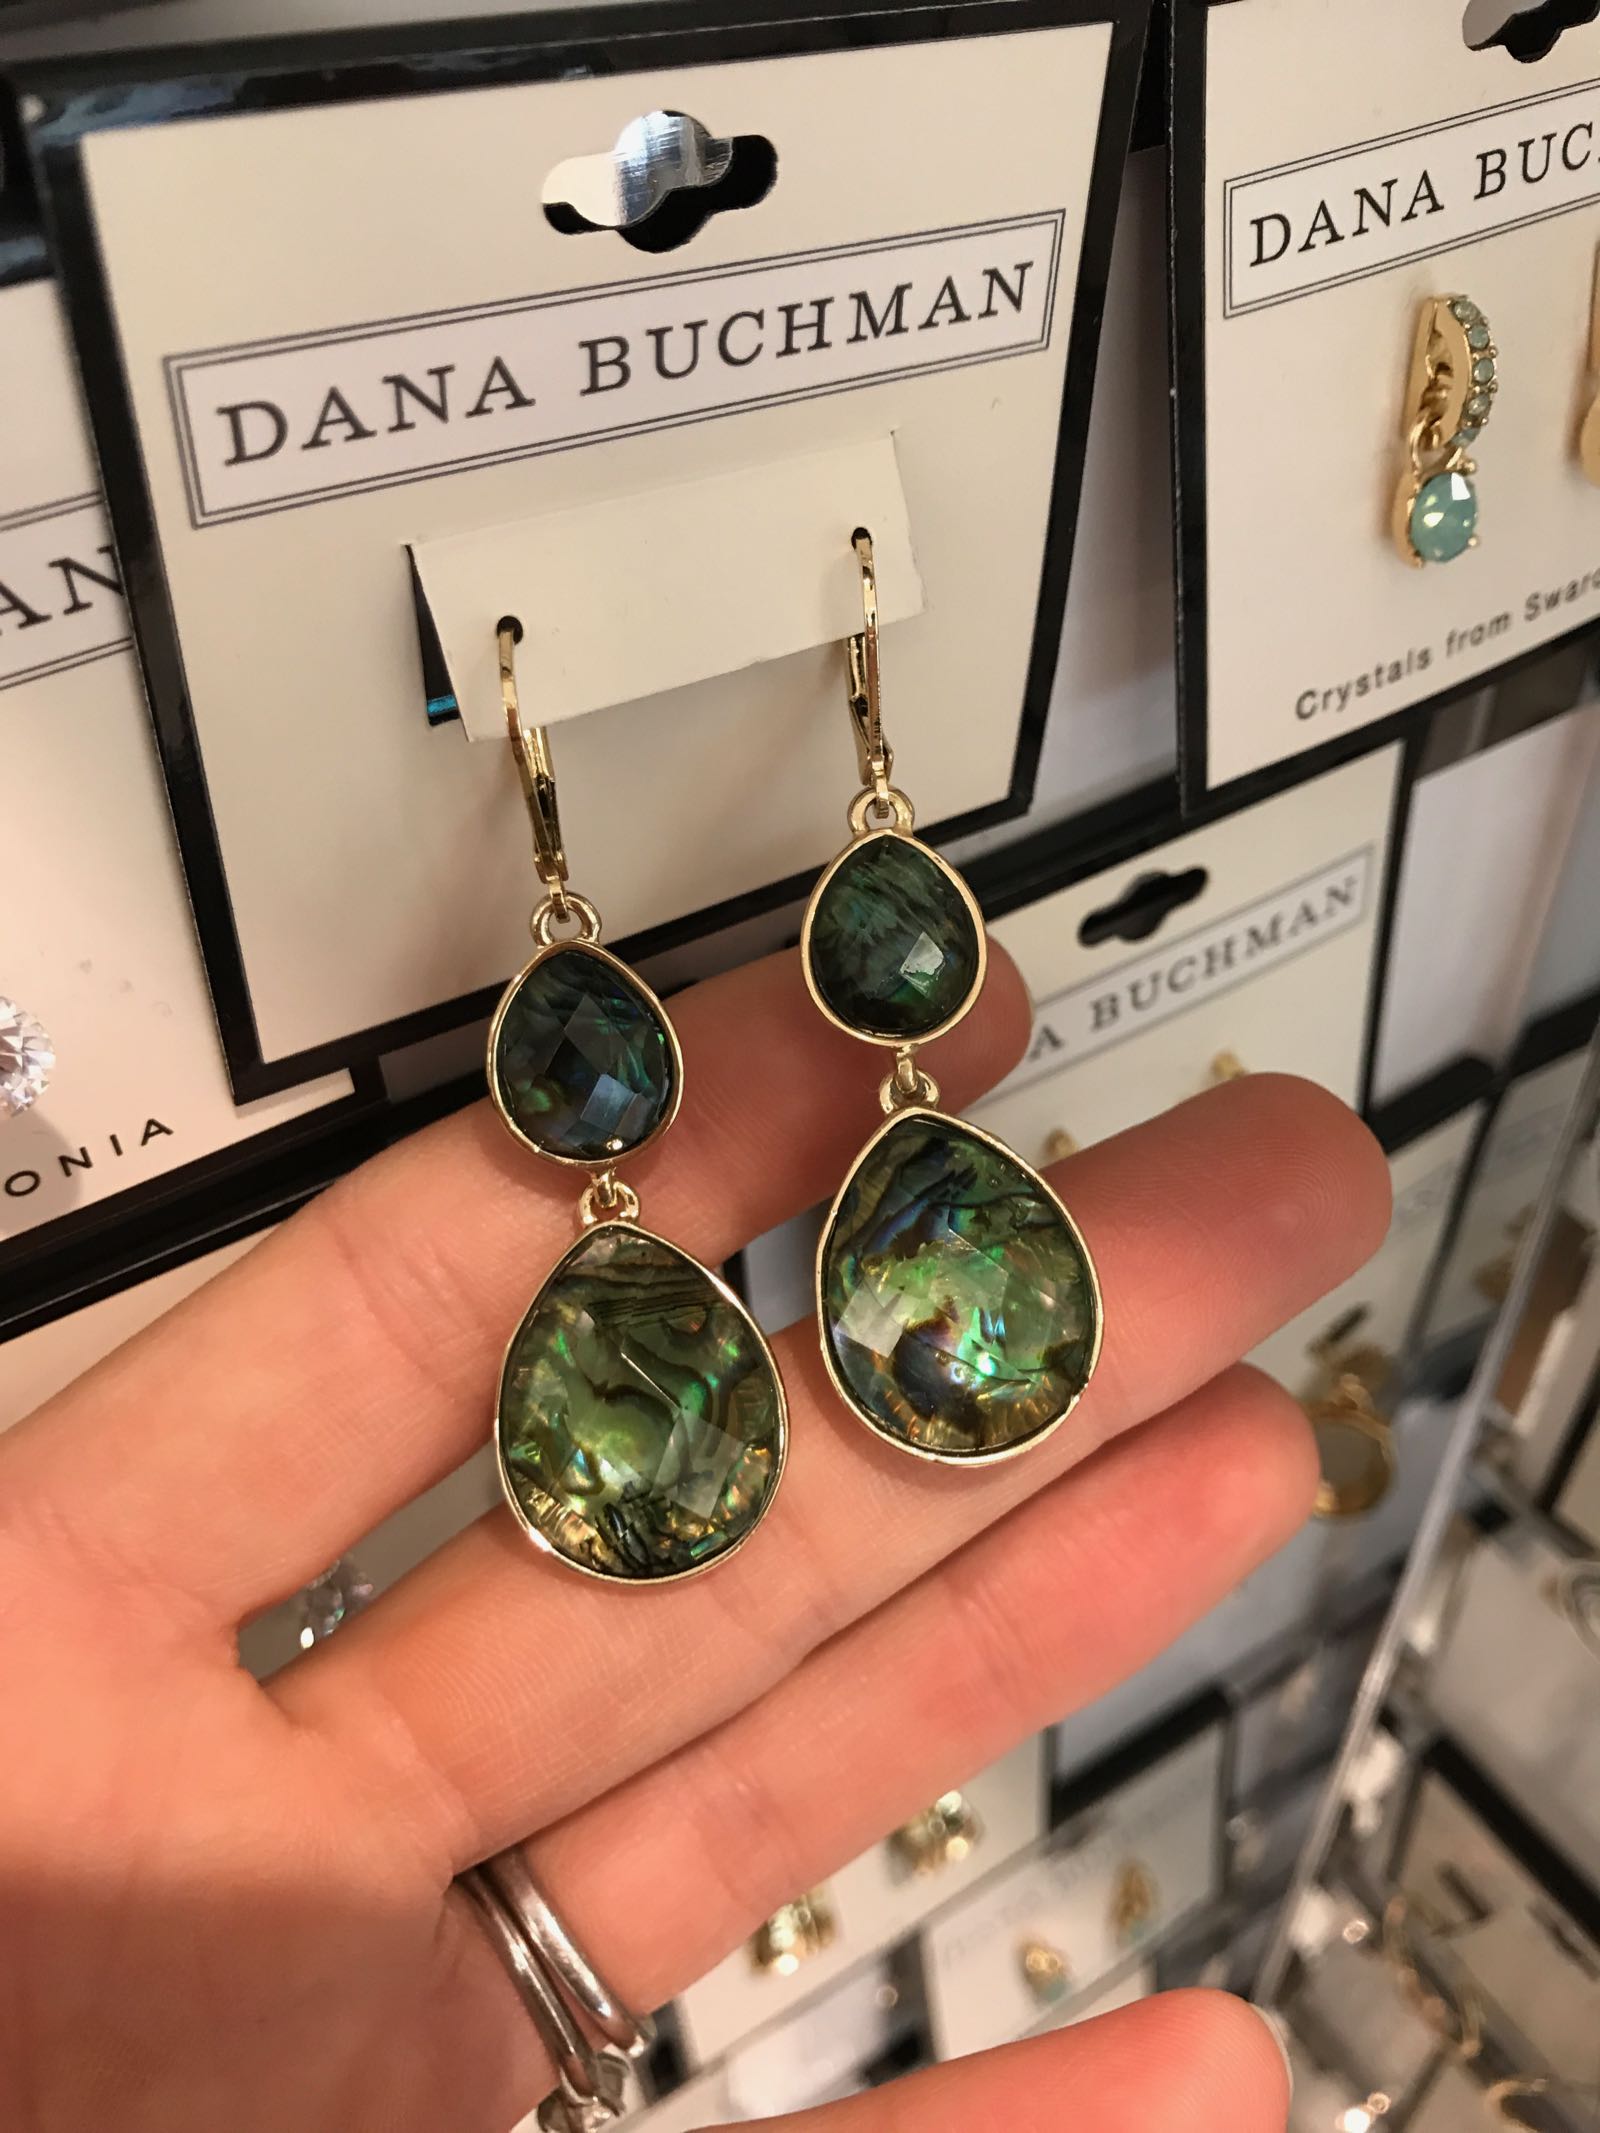 Jewelry that looks like J.Crew and BaubleBar at Kohl's!